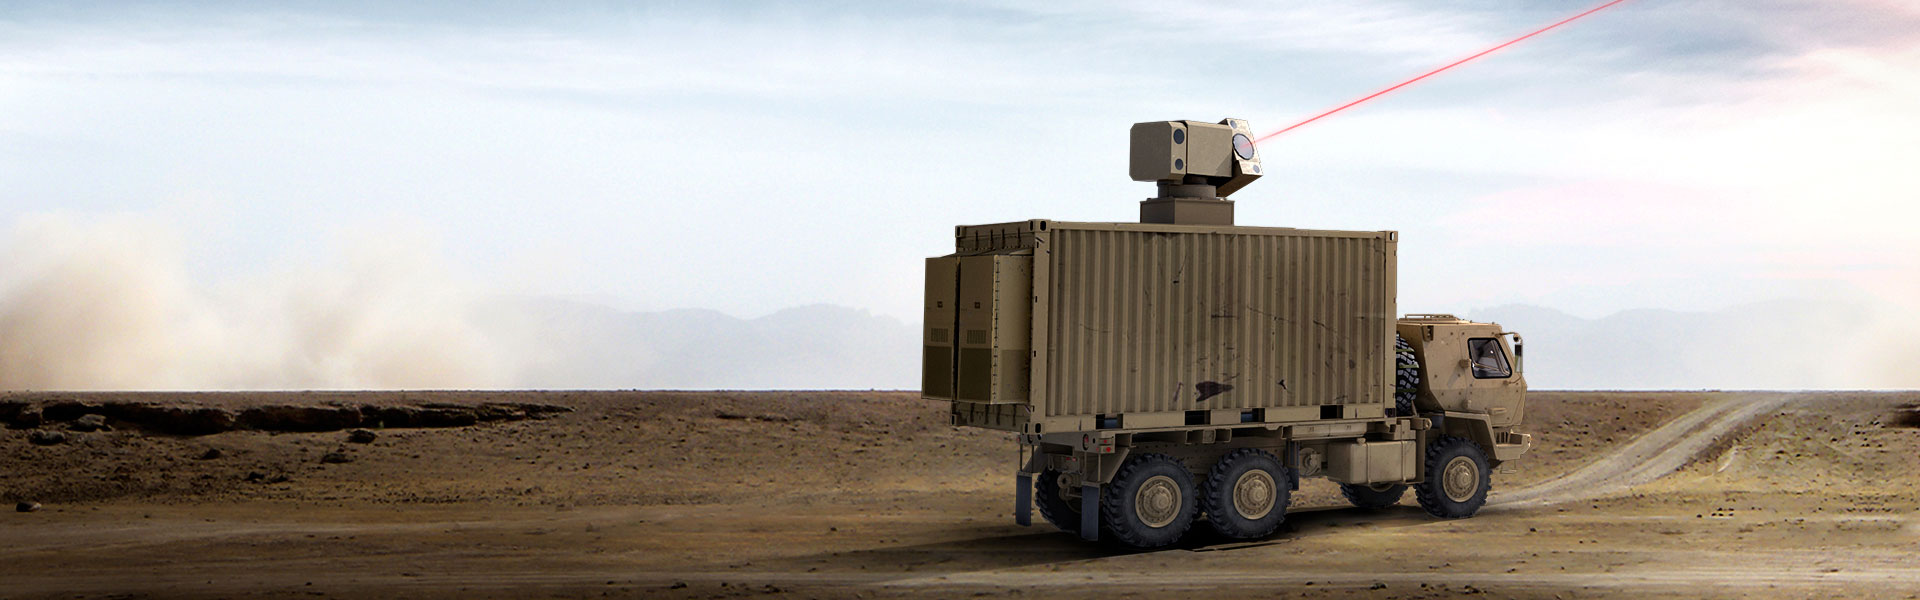 High Energy Laser Weapon System